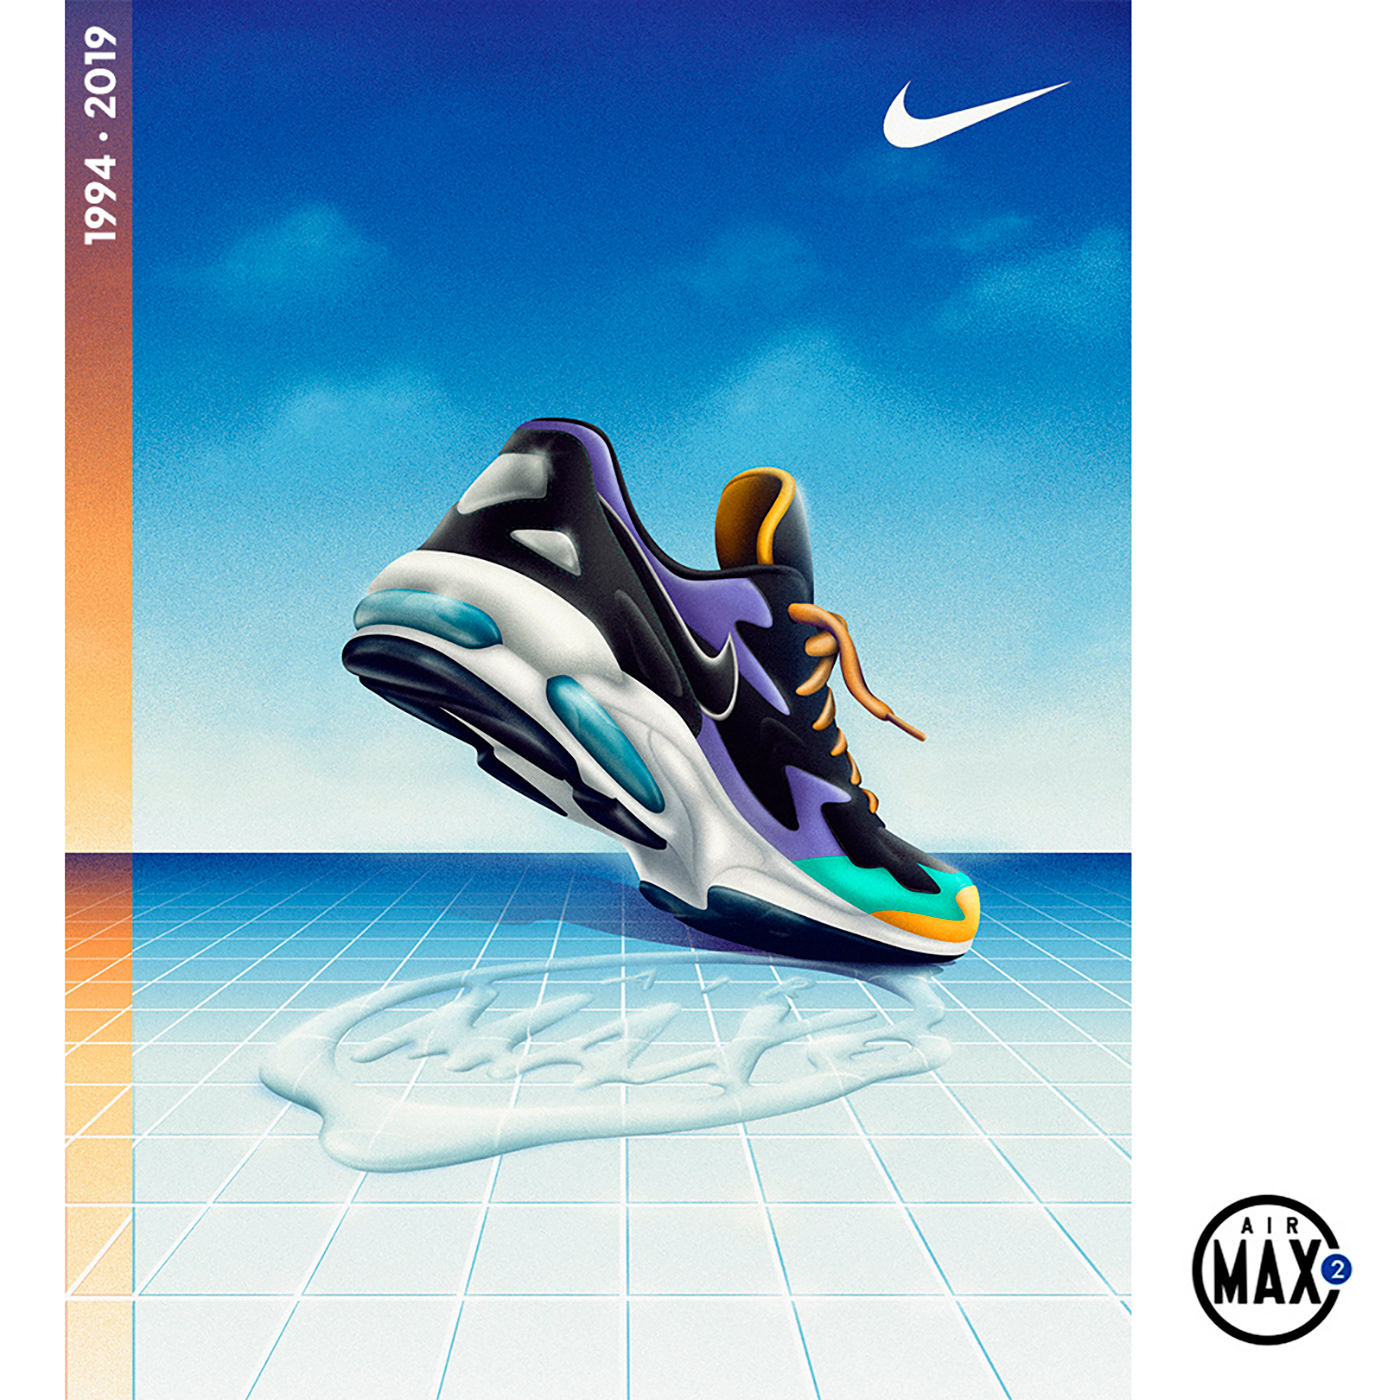 80s 90s air max airbrush ILLUSTRATION  lettering Nike shoes sneaker